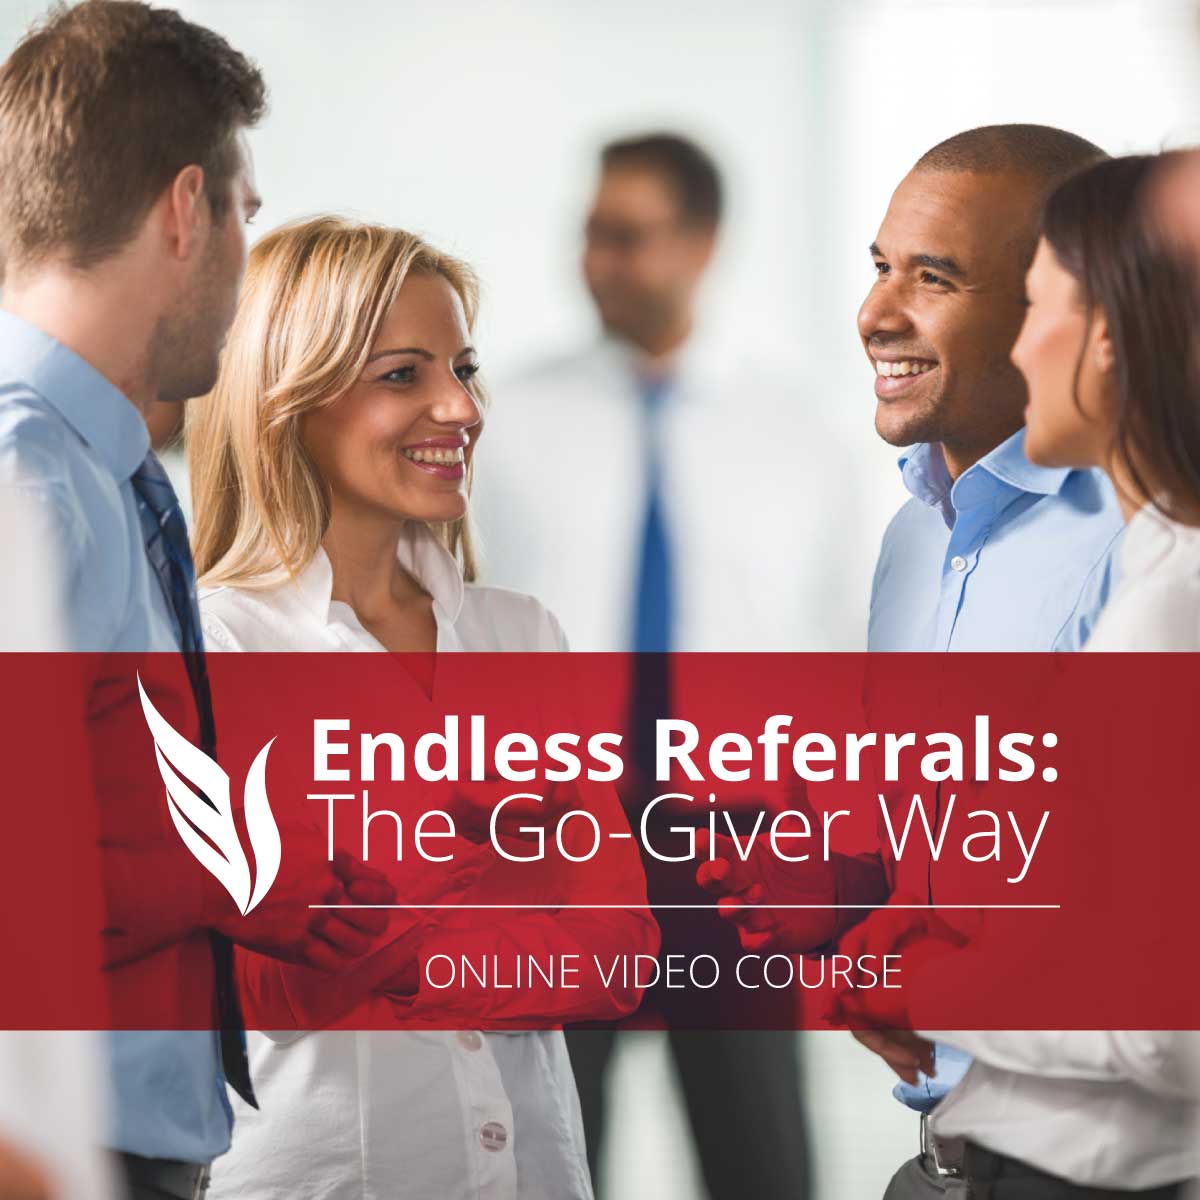 Endless Referrals: The Go-Giver Way Online Video Course